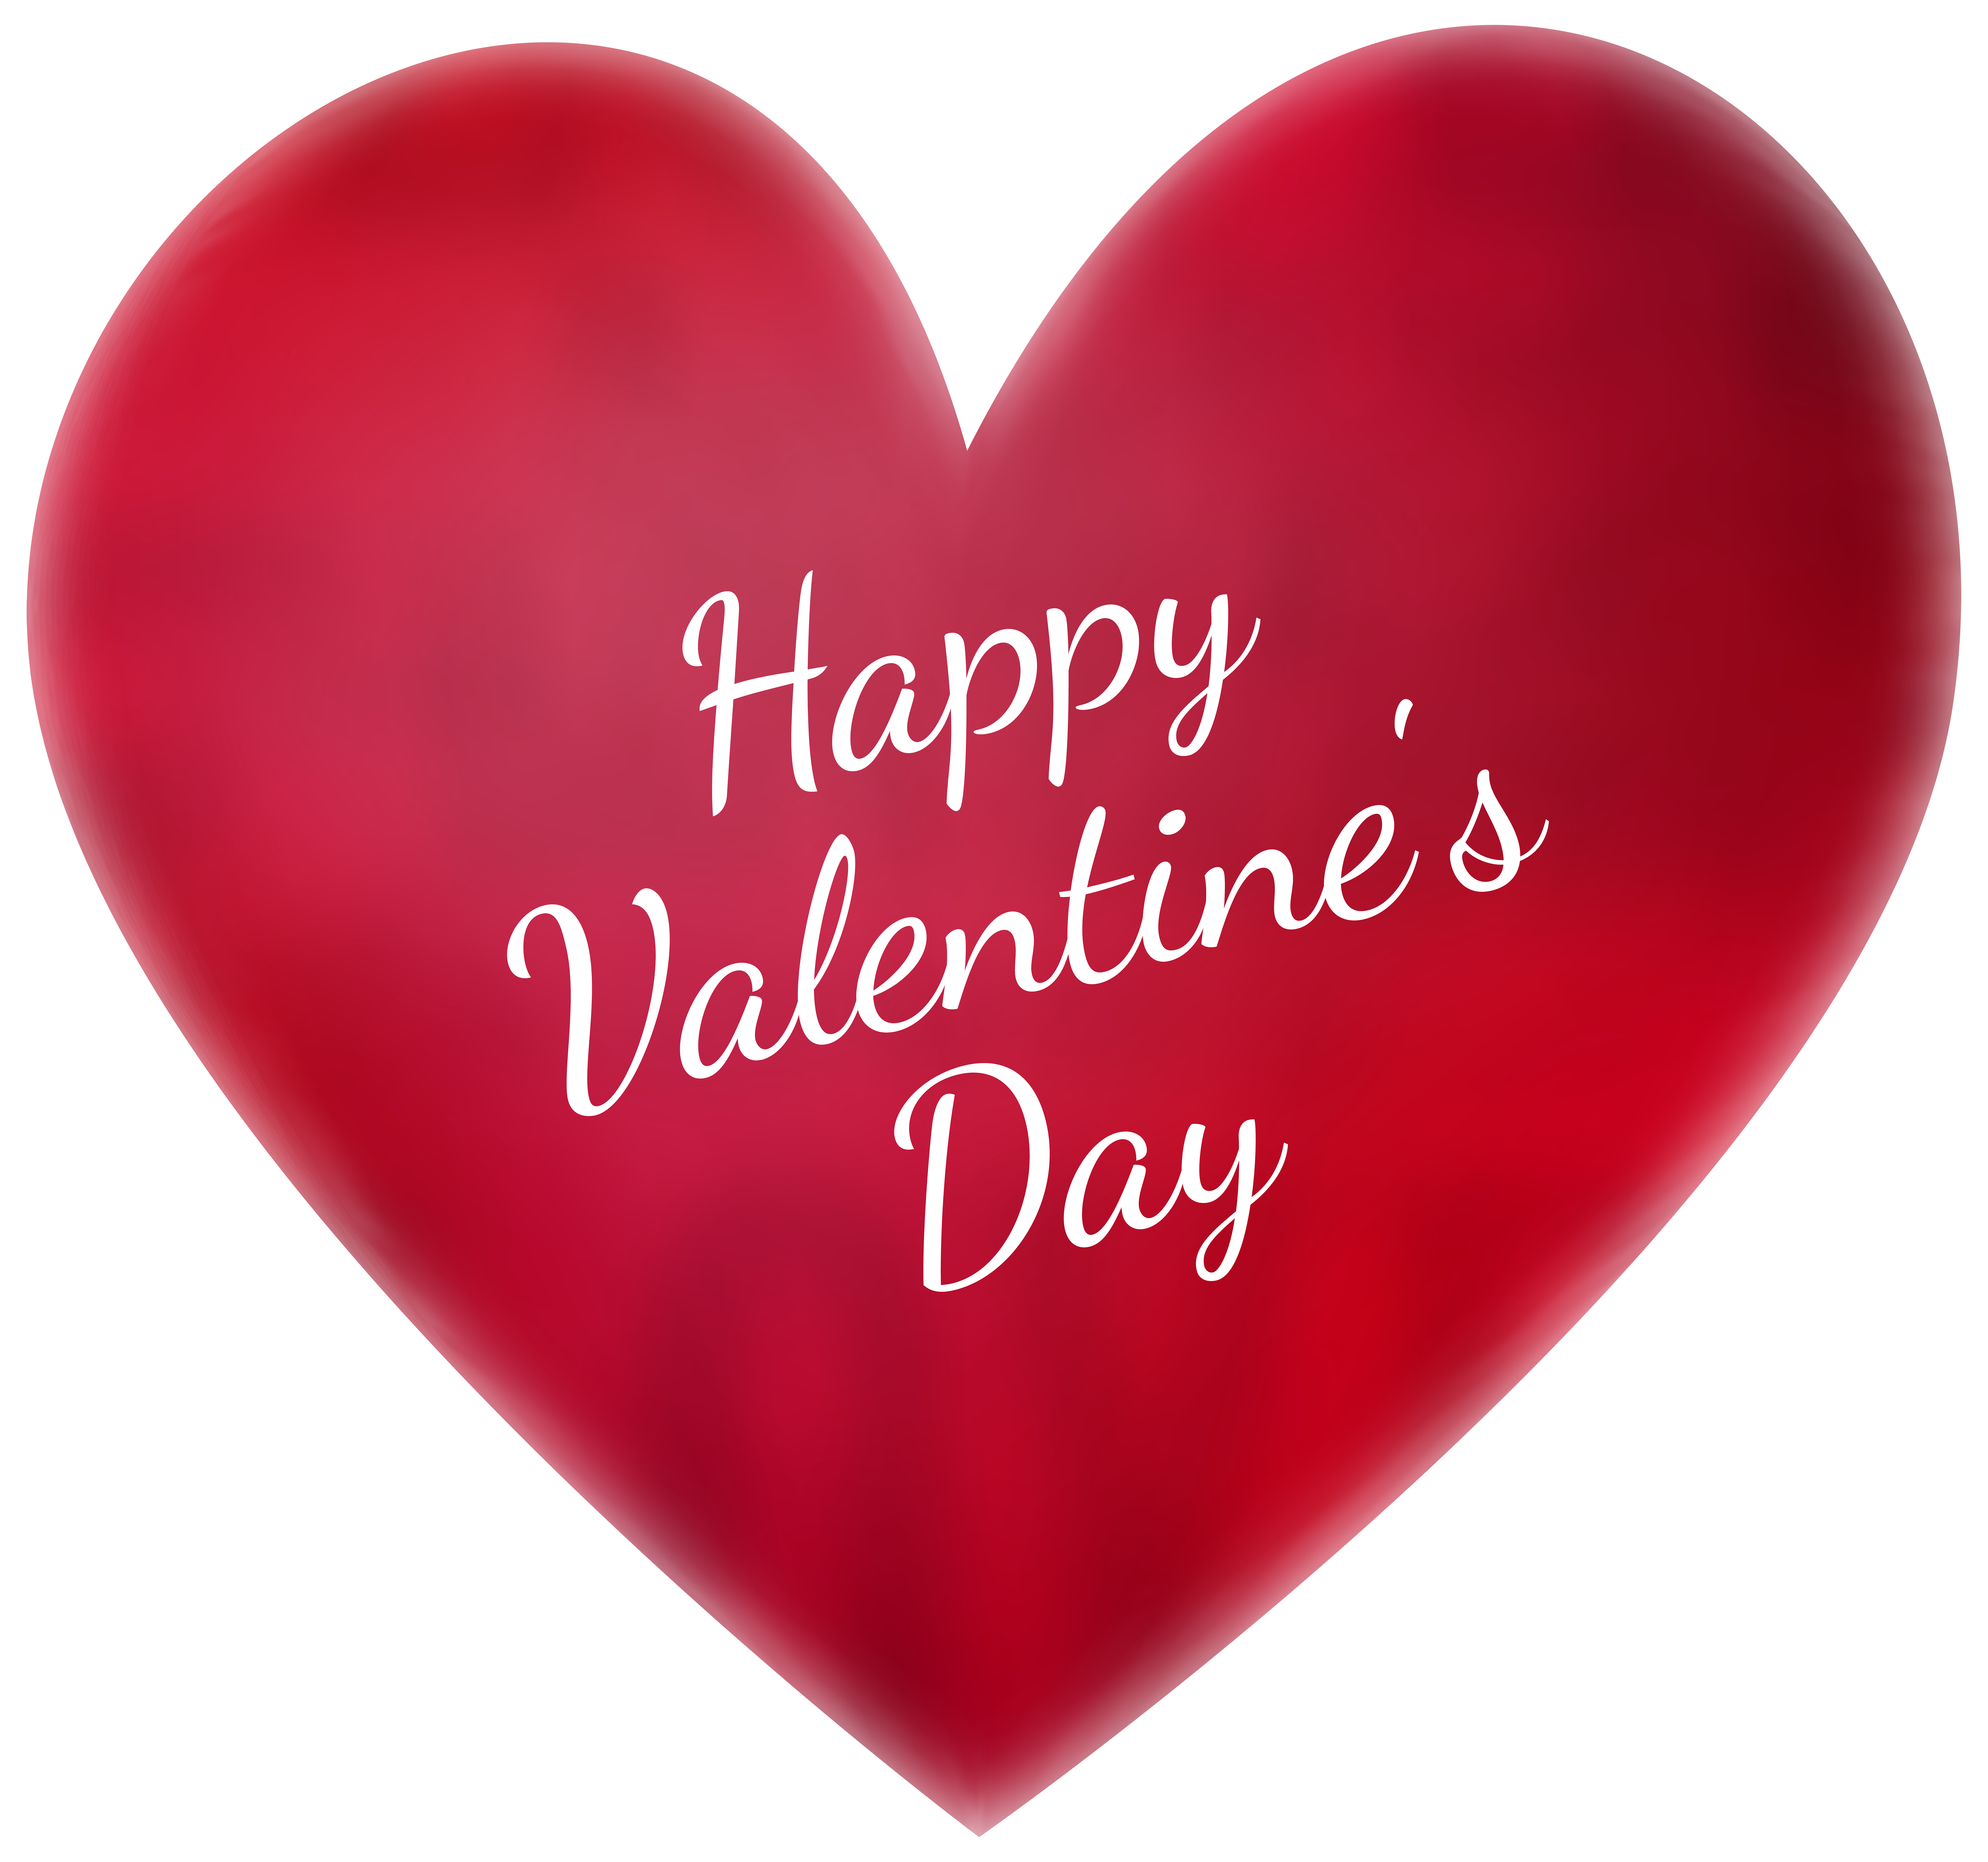 Have a valentine s day. Валентинка. Валентинка Happy Valentine's Day.